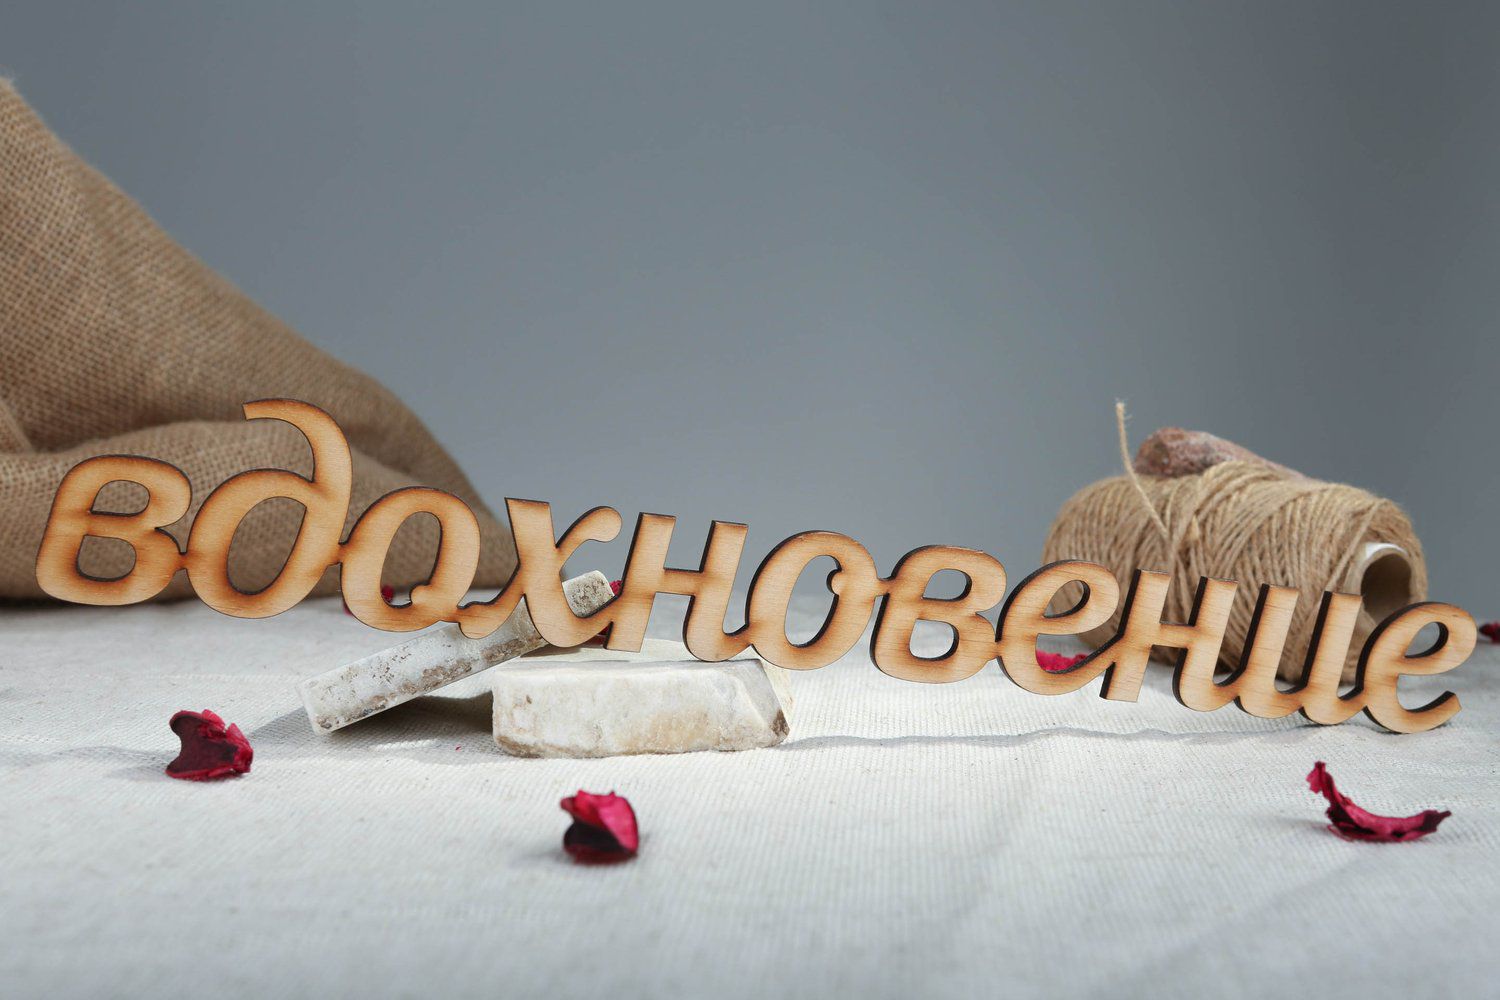 Chipboard-lettering made of plywood Вдохновение photo 4